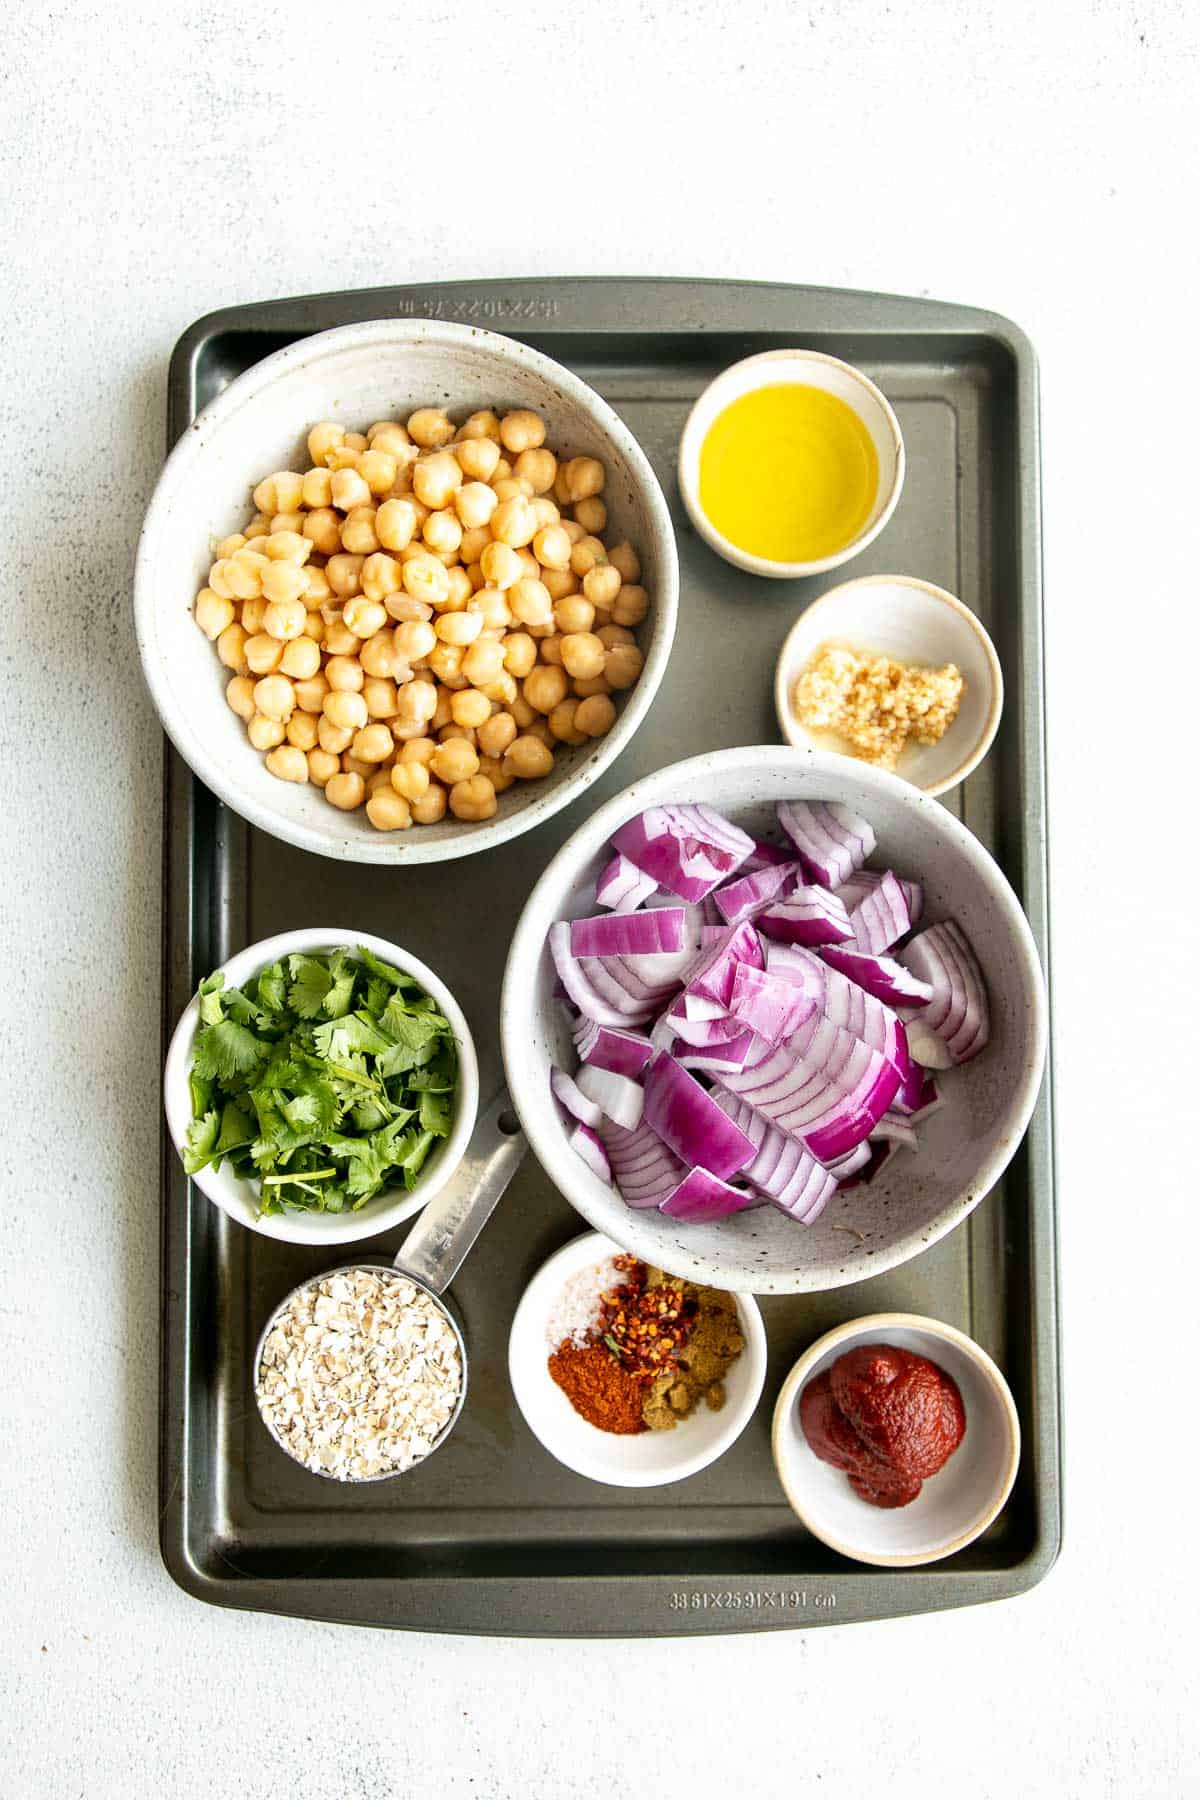 ingredients for the burgers in bowls on a baking pan